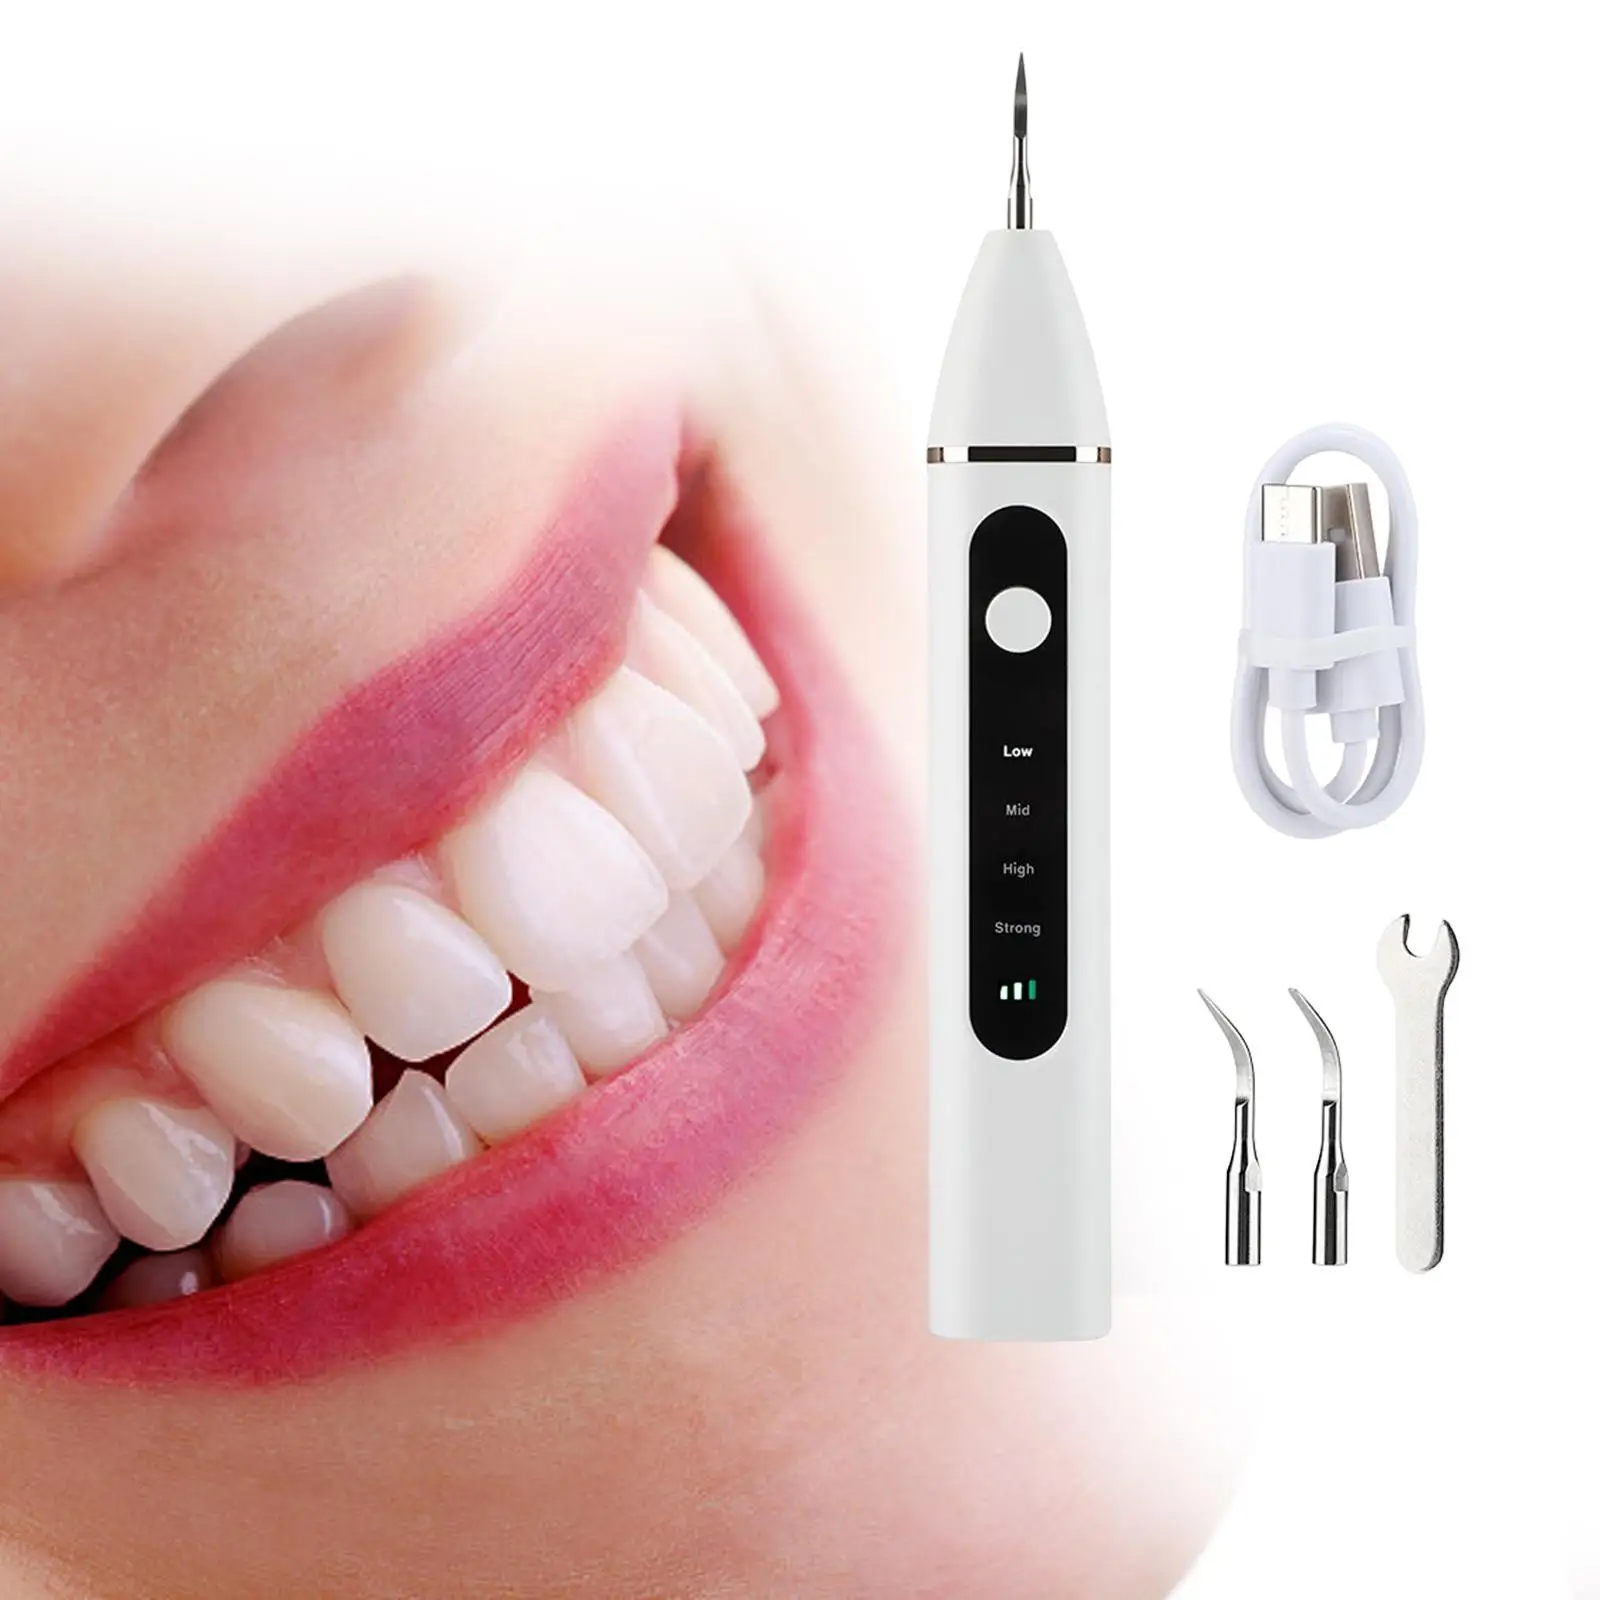 Cordless teeths Cleaner Visual Rechargeable Irrigator teeths 4 intensities teeths Cleaning Toothbrush for Home Travel